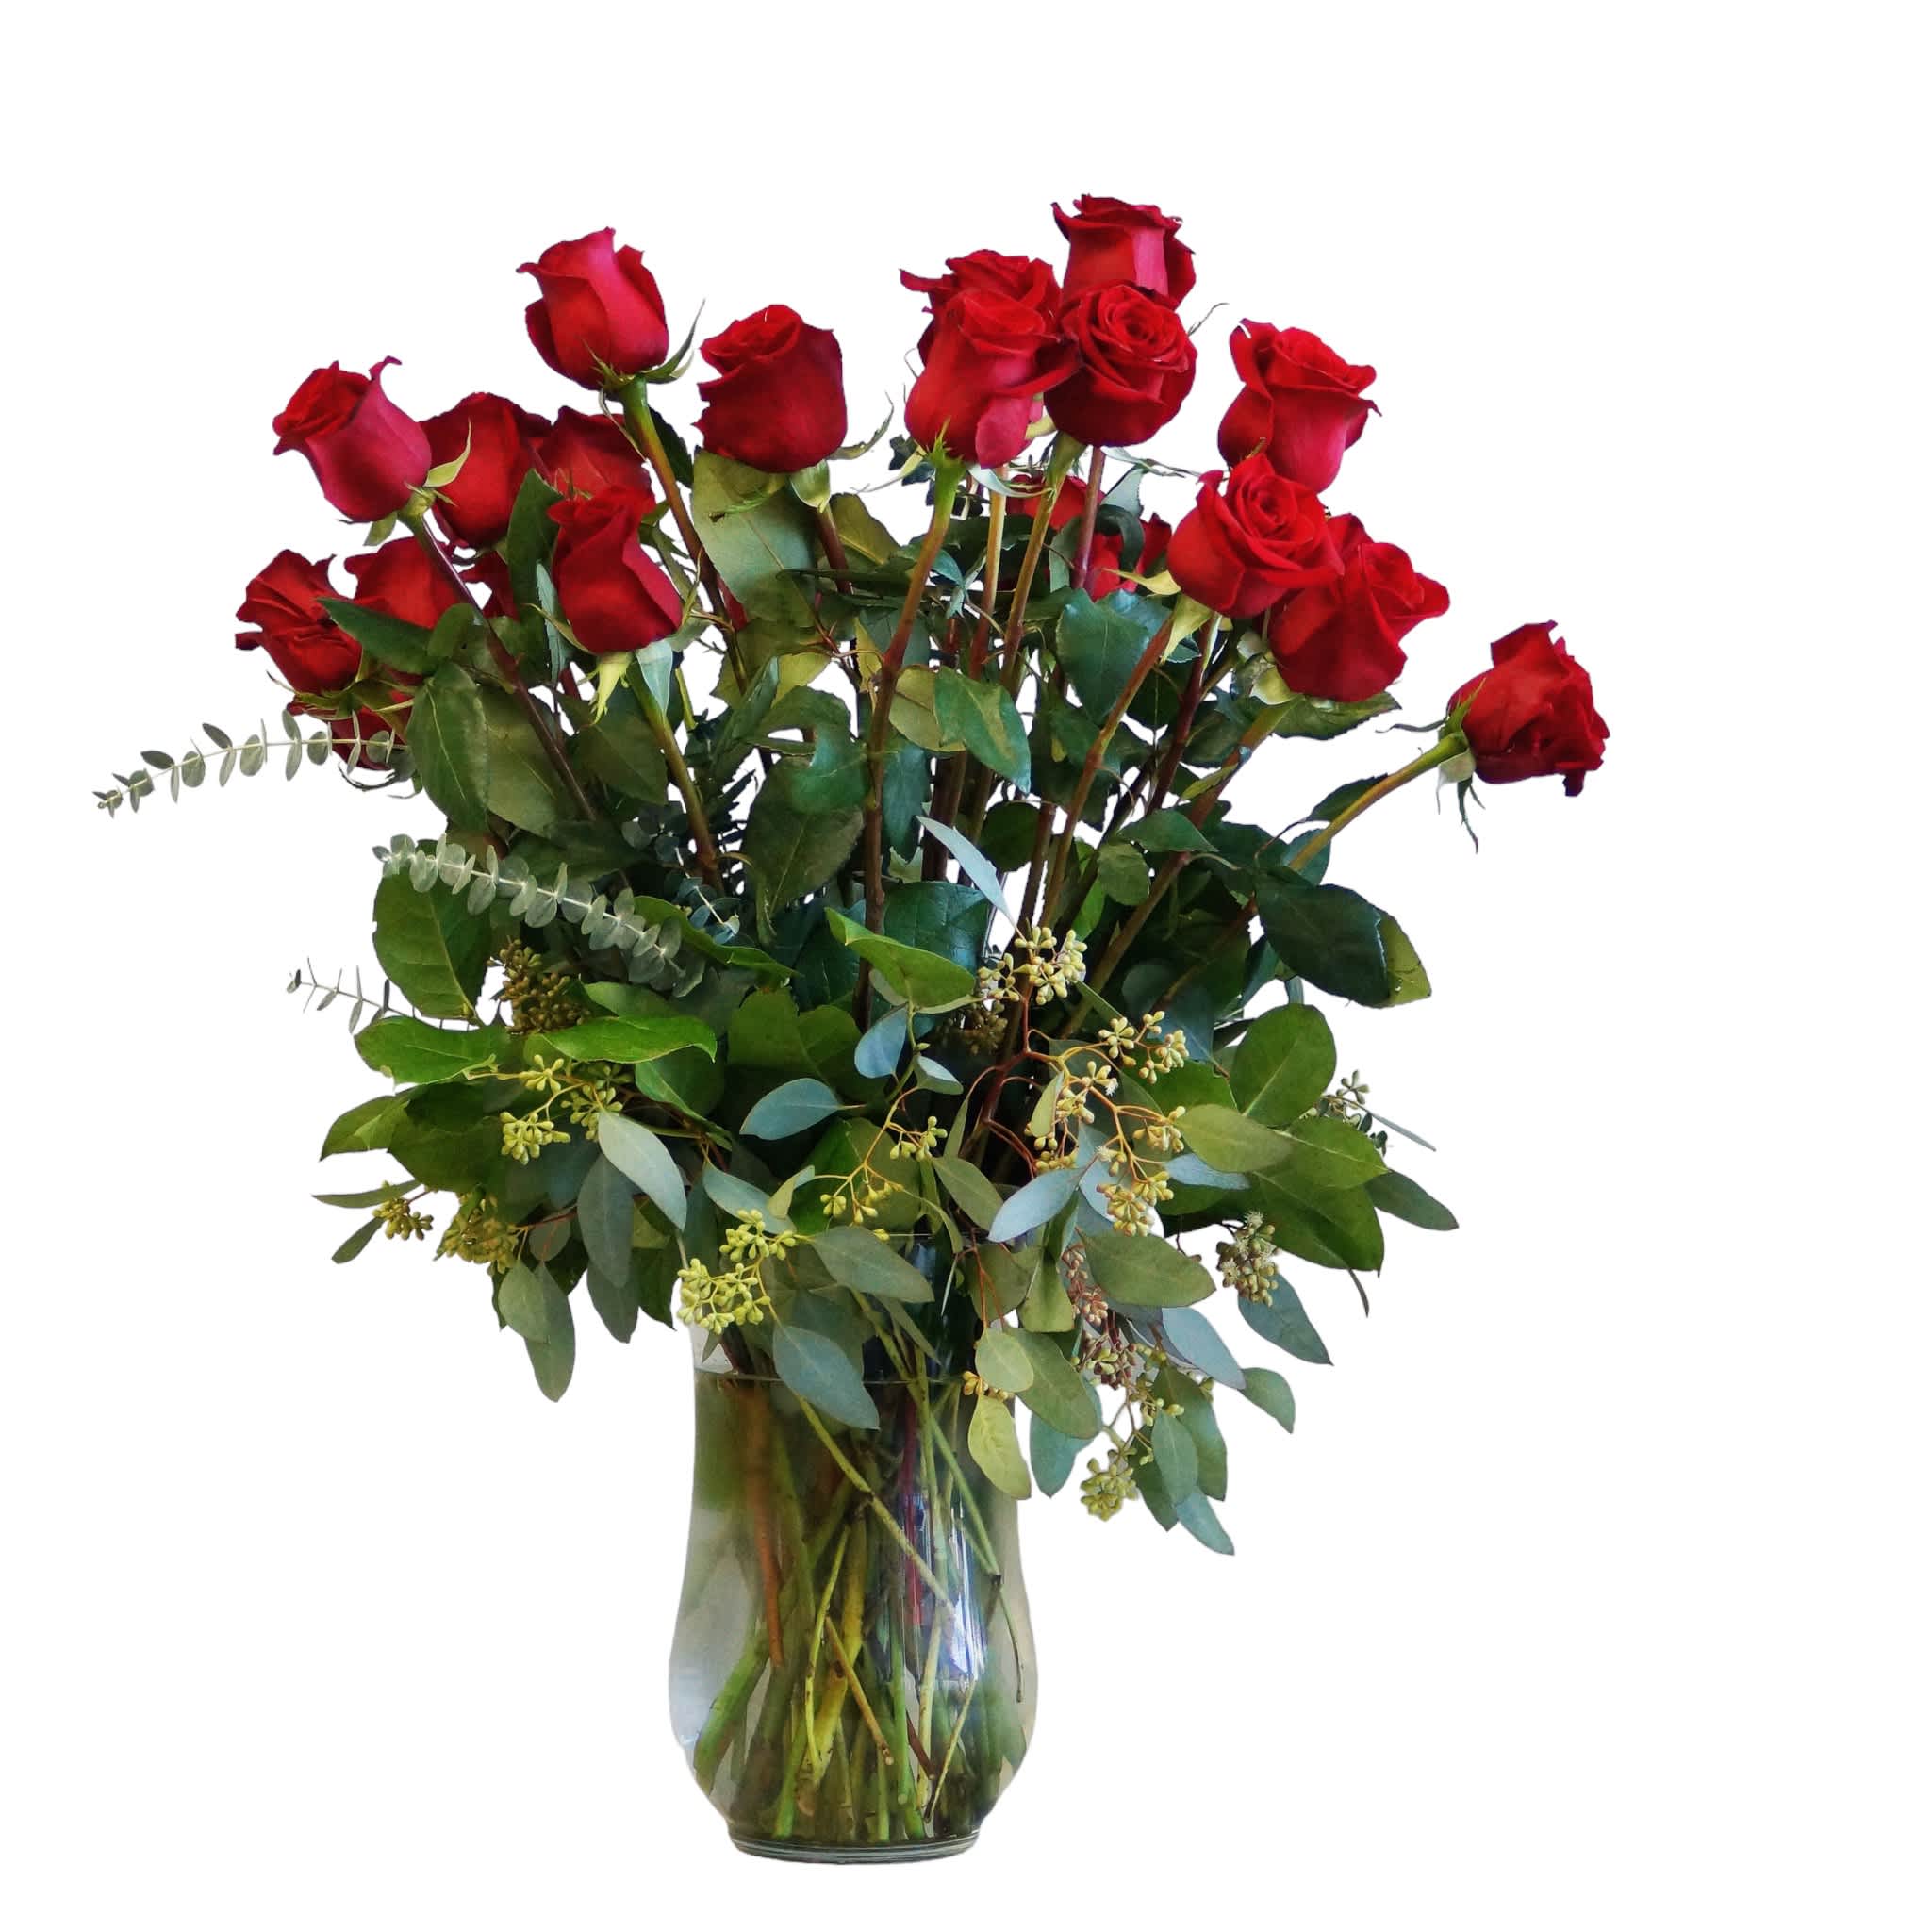 Two Dozen Roses - Show her how much you love her with classic red 